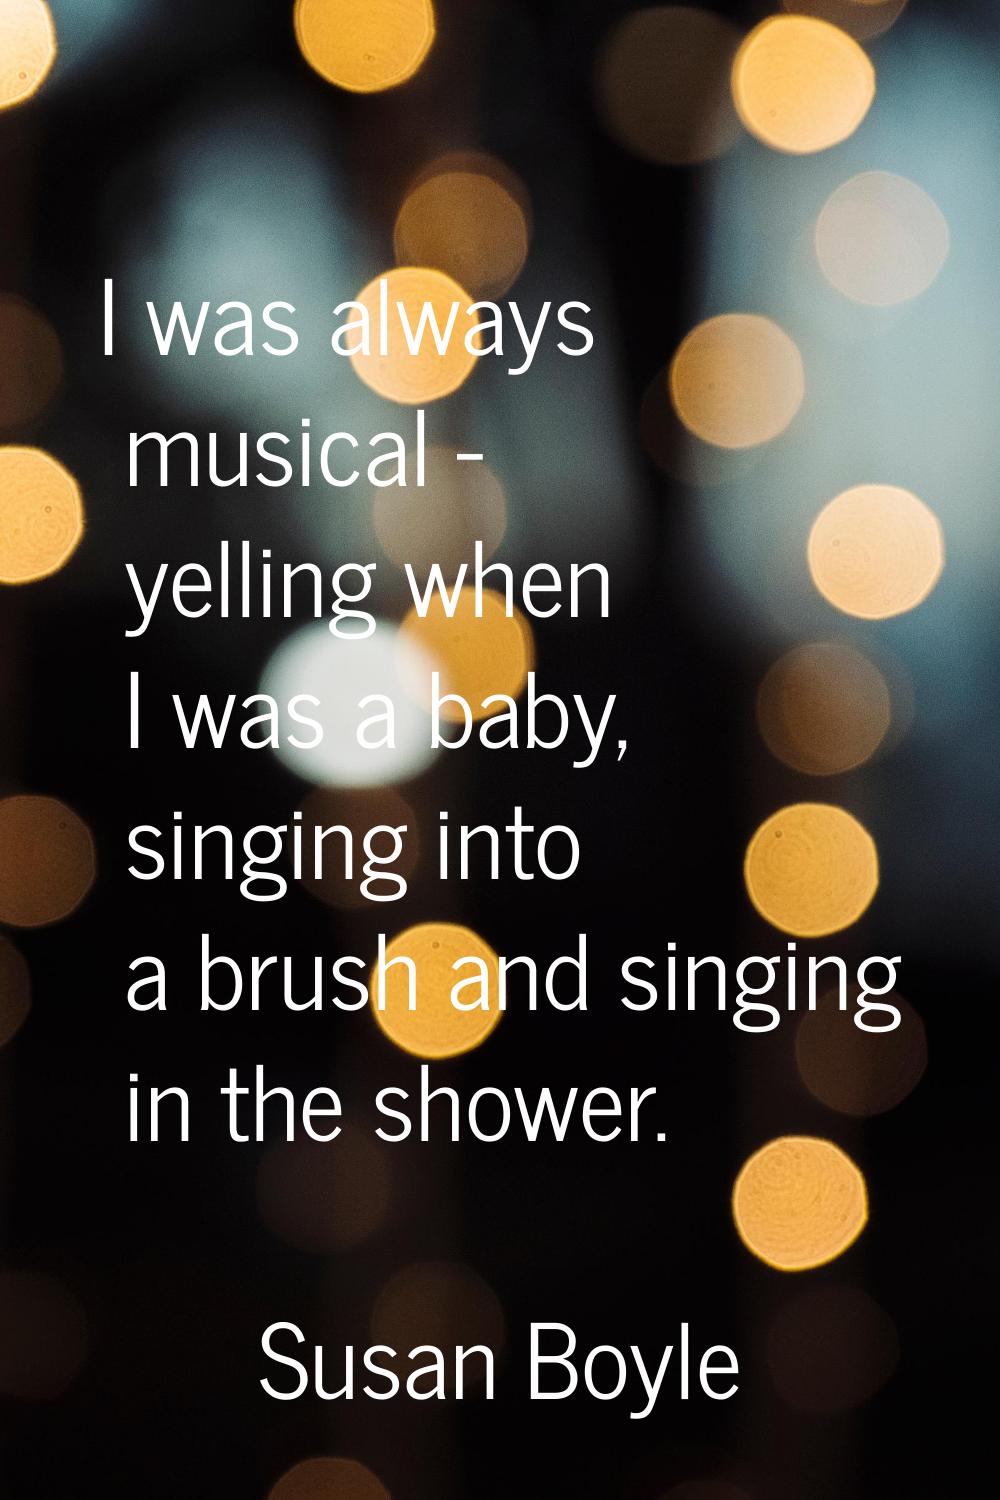 I was always musical - yelling when I was a baby, singing into a brush and singing in the shower.